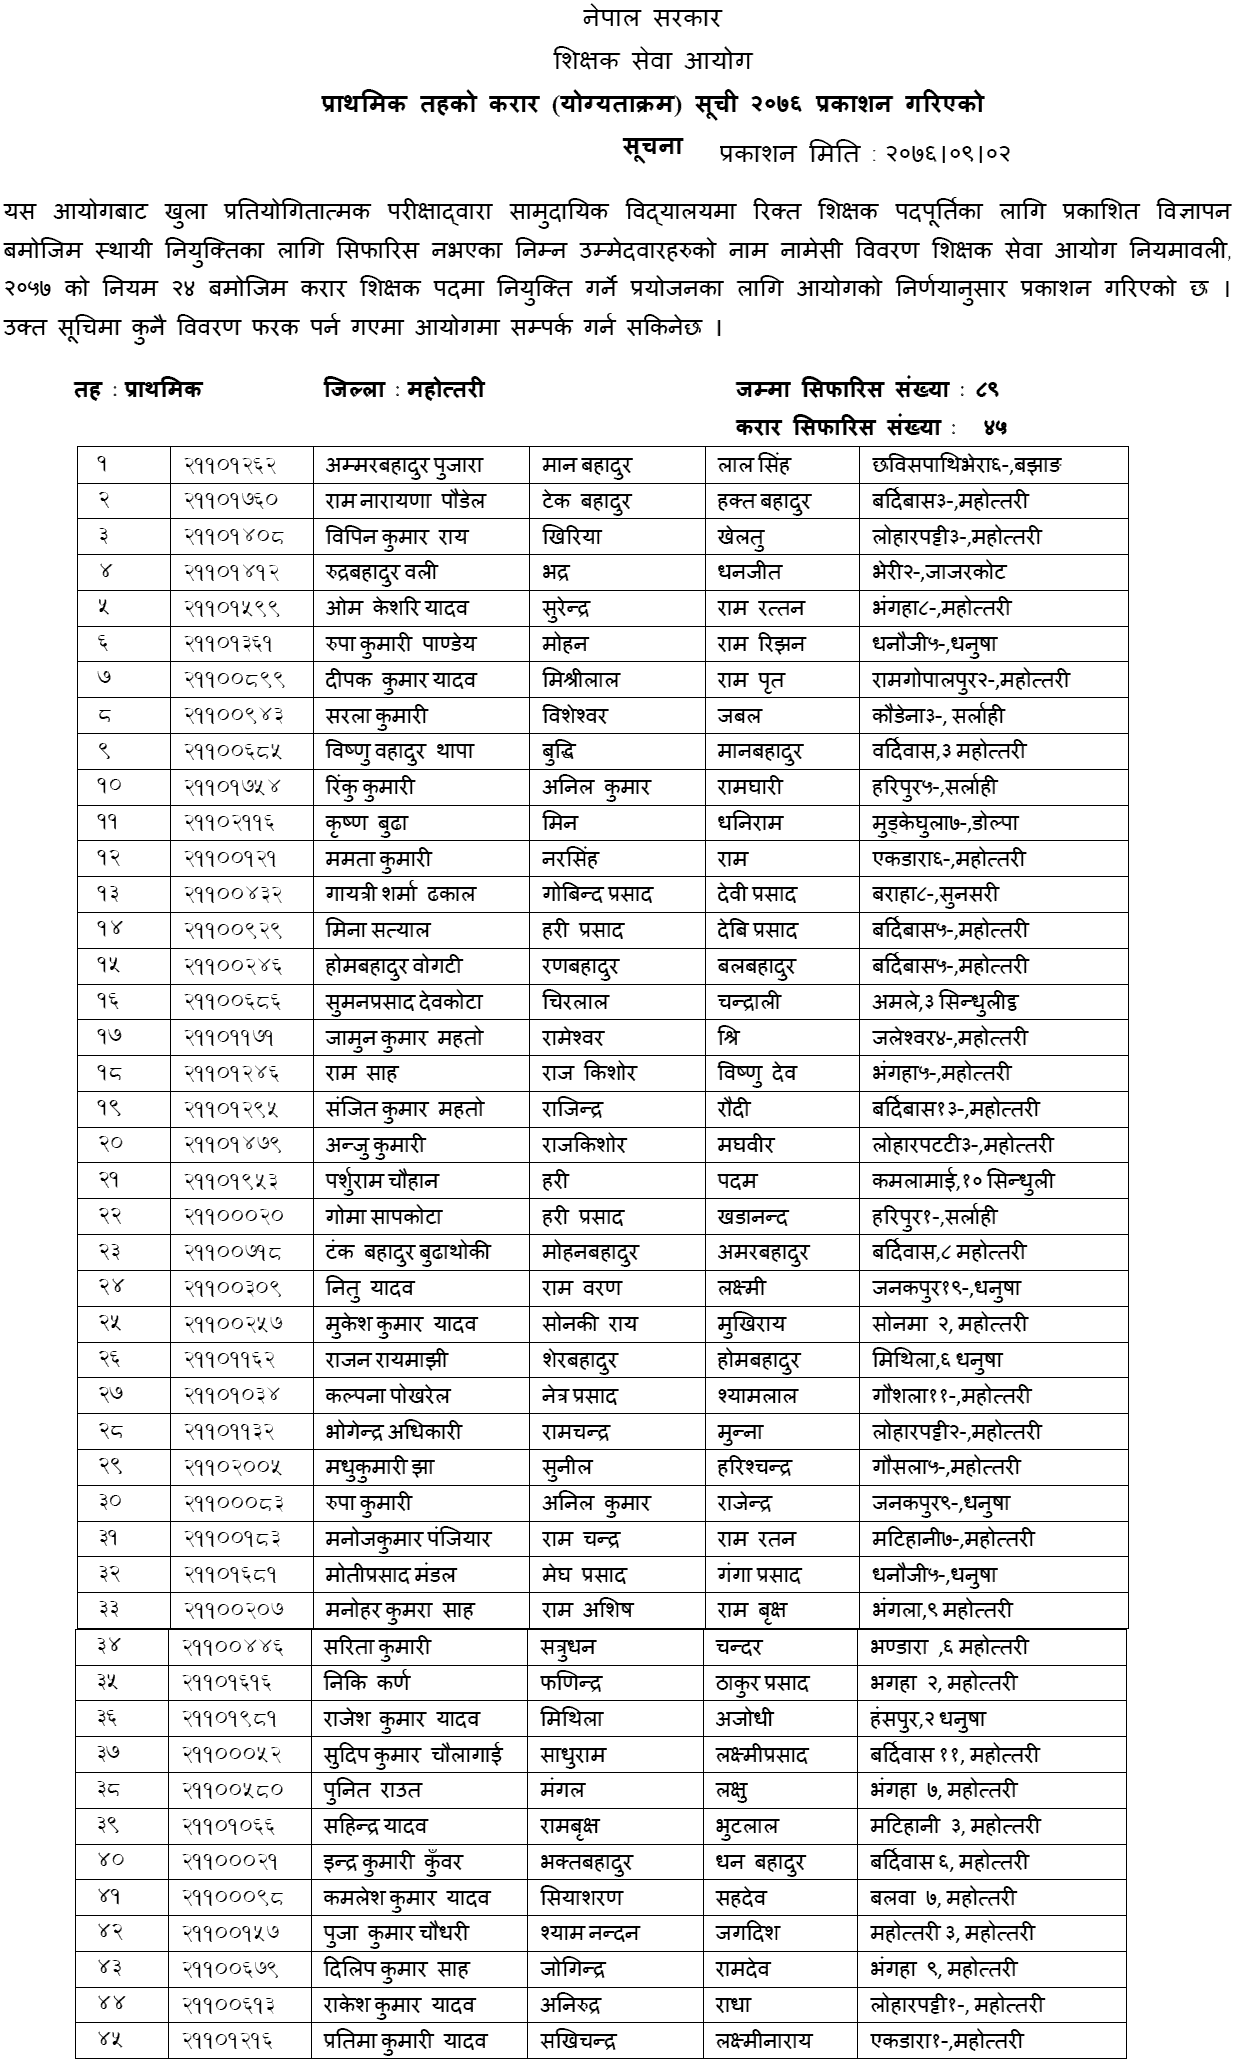 TSC Published Primary Level Contract List of Mahottari